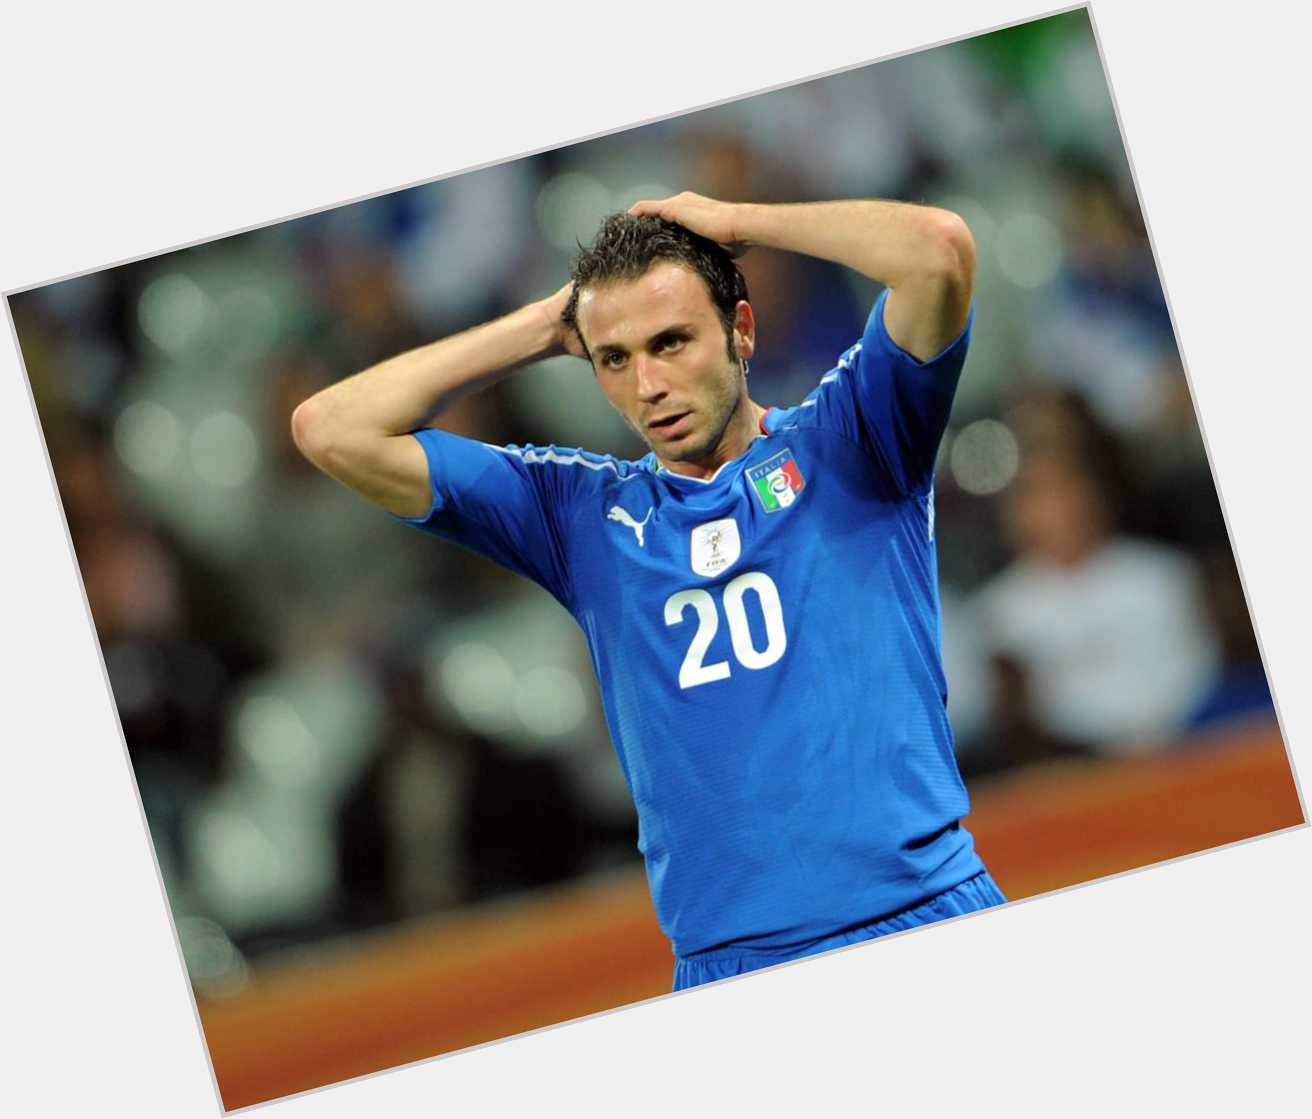 Giampaolo Pazzini dating 2